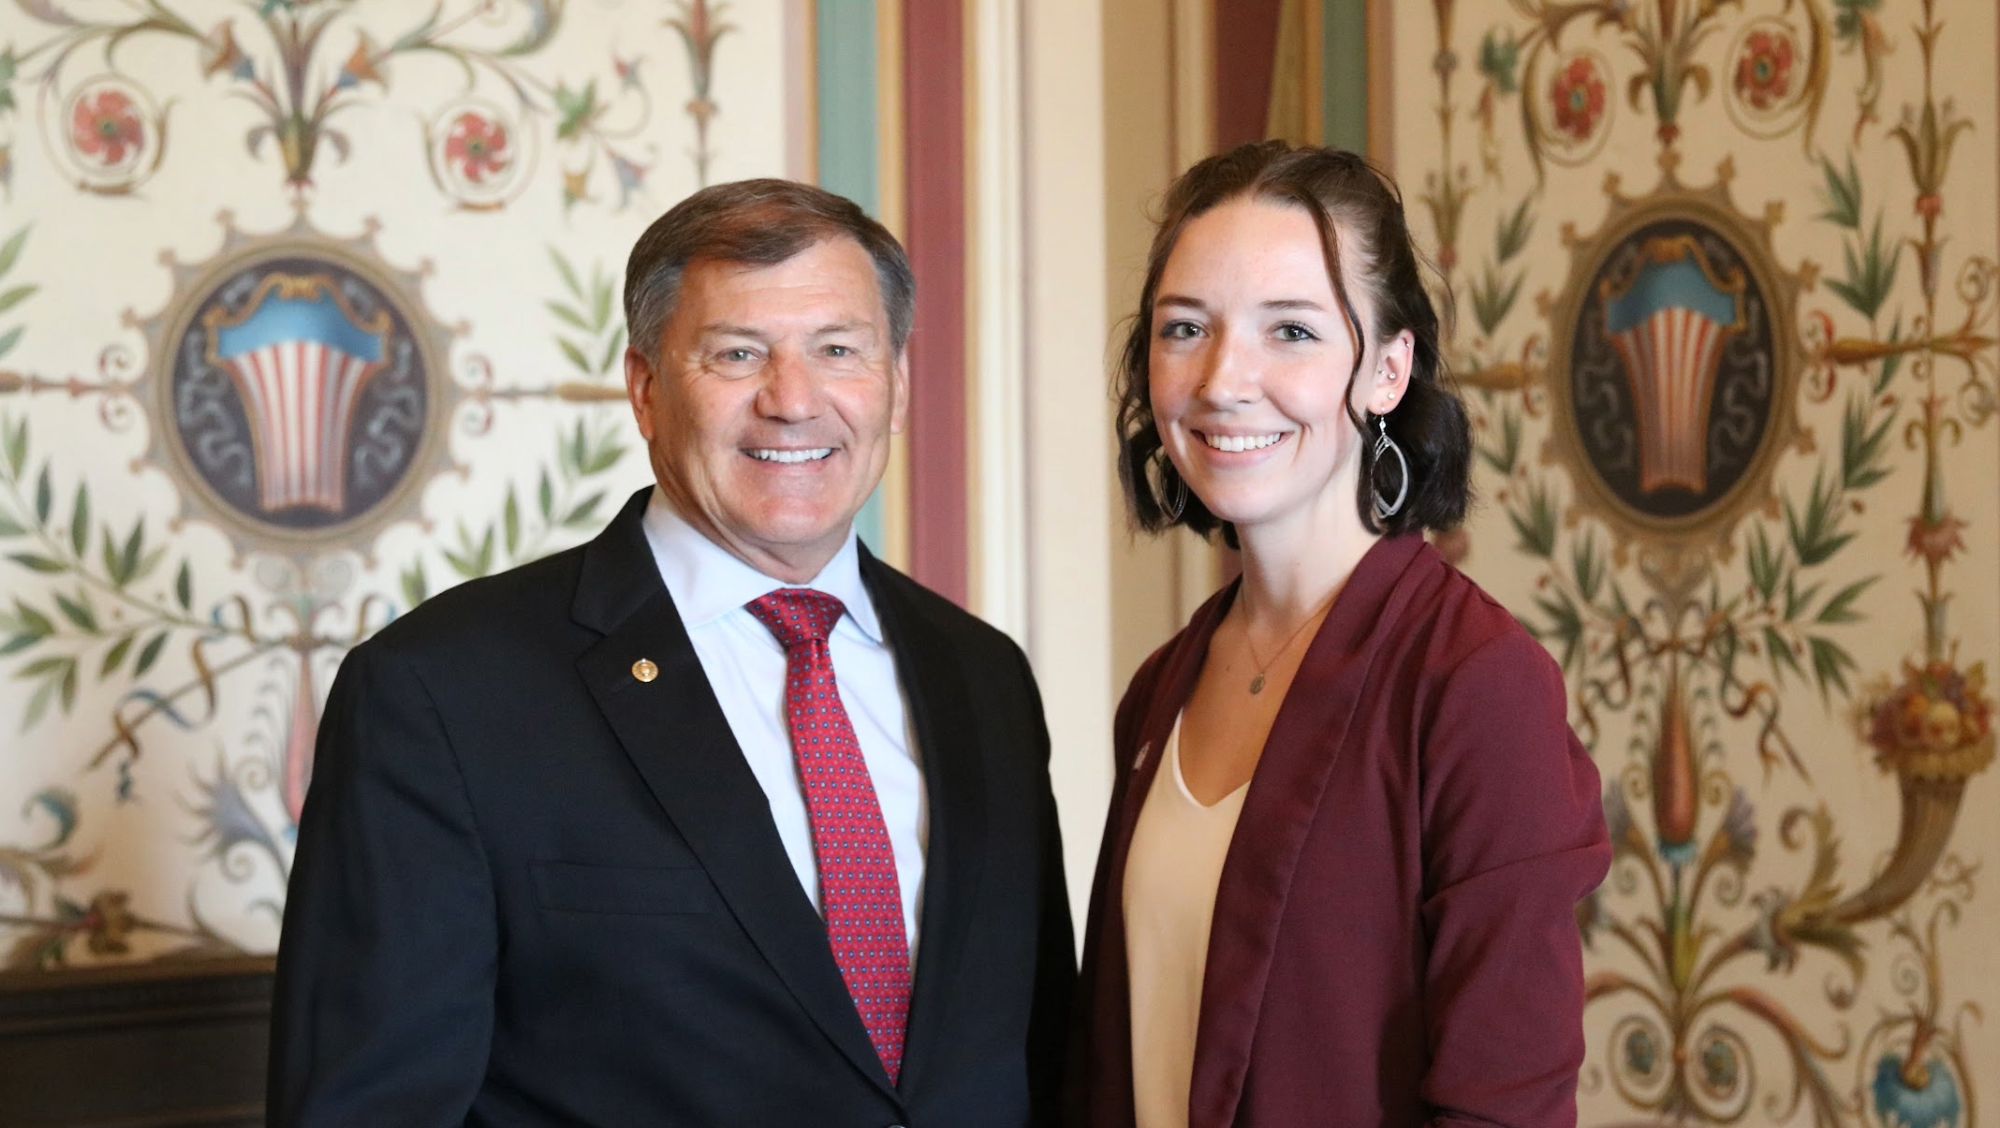 TaylorAnn Wooley with Senator Mike Rounds